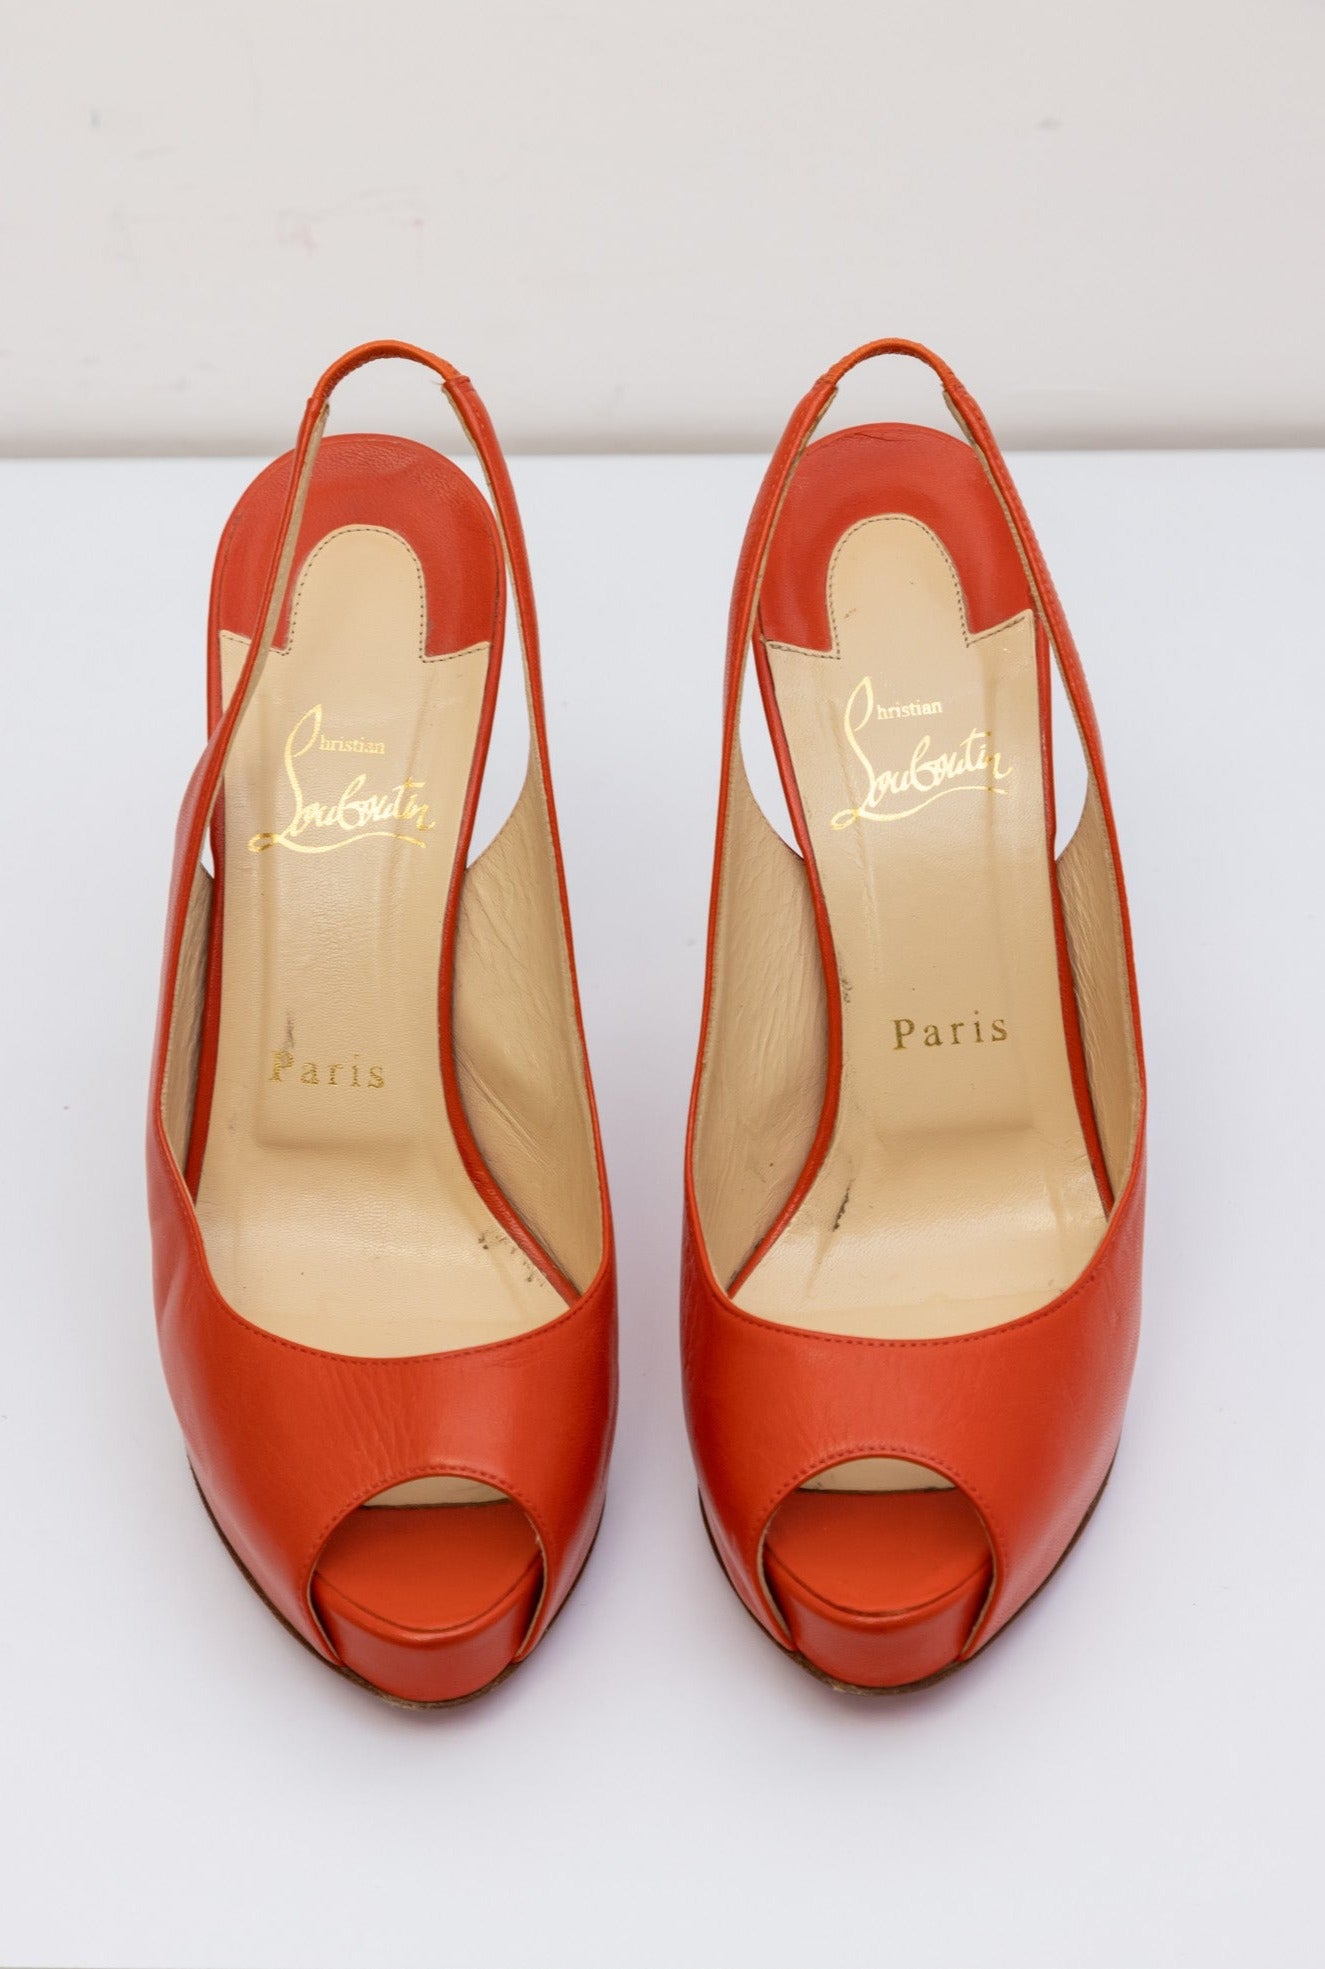 CHRISTIAN LOUBOUTIN Orange Leather Sling-back Pumps Heels Shoes - New, Size IT 38, Made in Italy